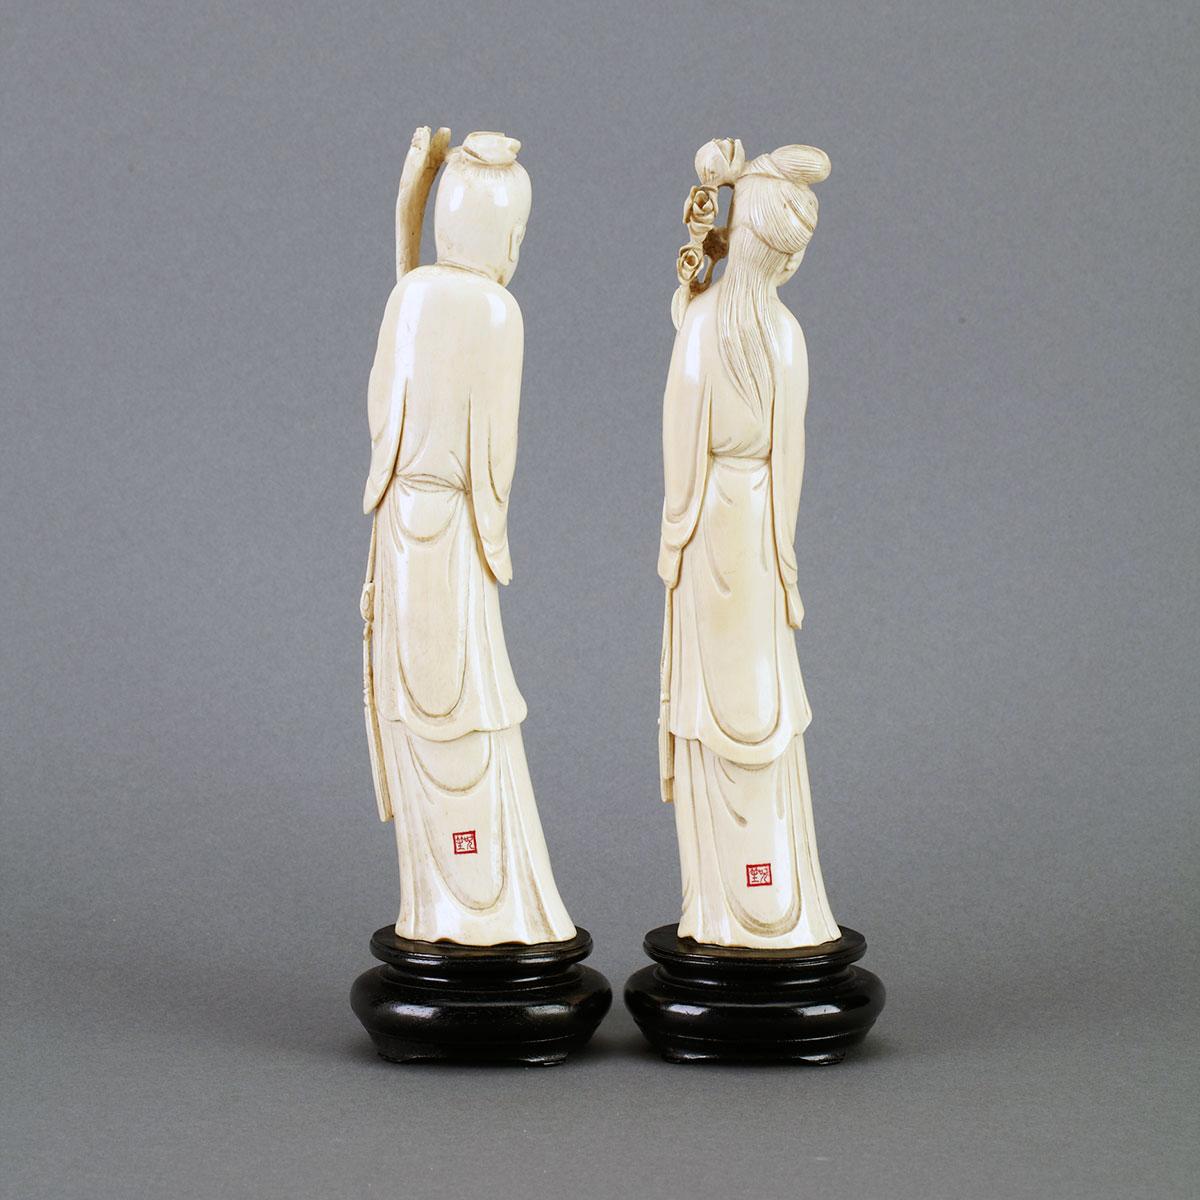 Two Ivory Carved Figures